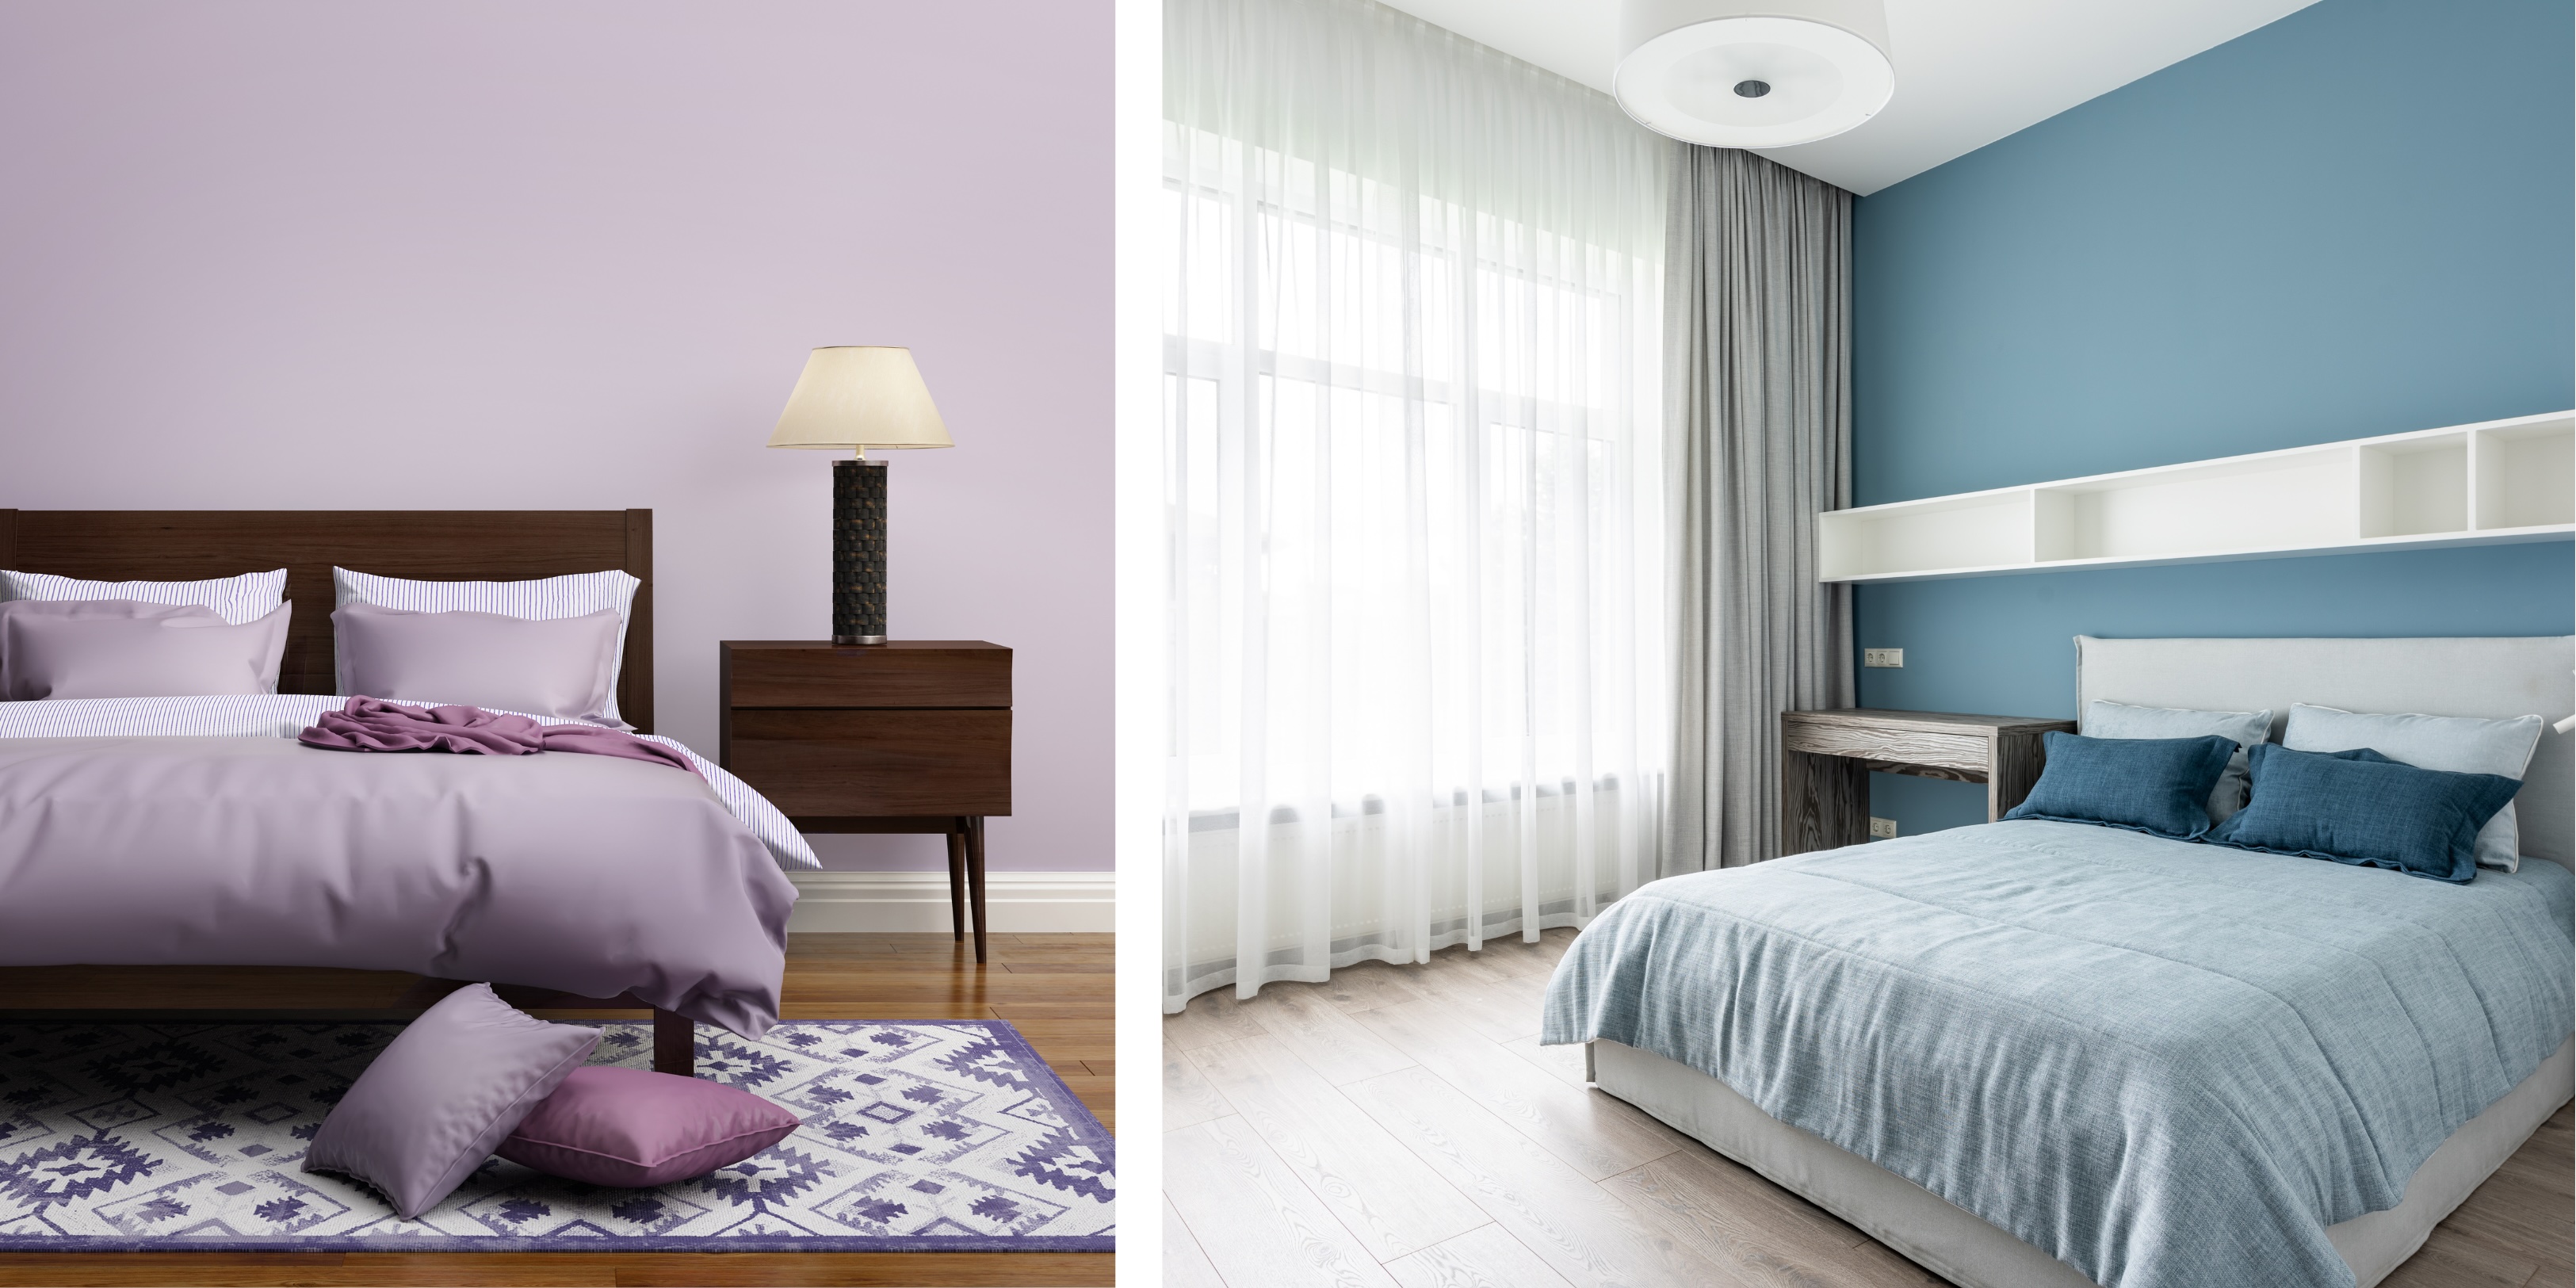 Restful bedroom ambiances with ECOS Paints